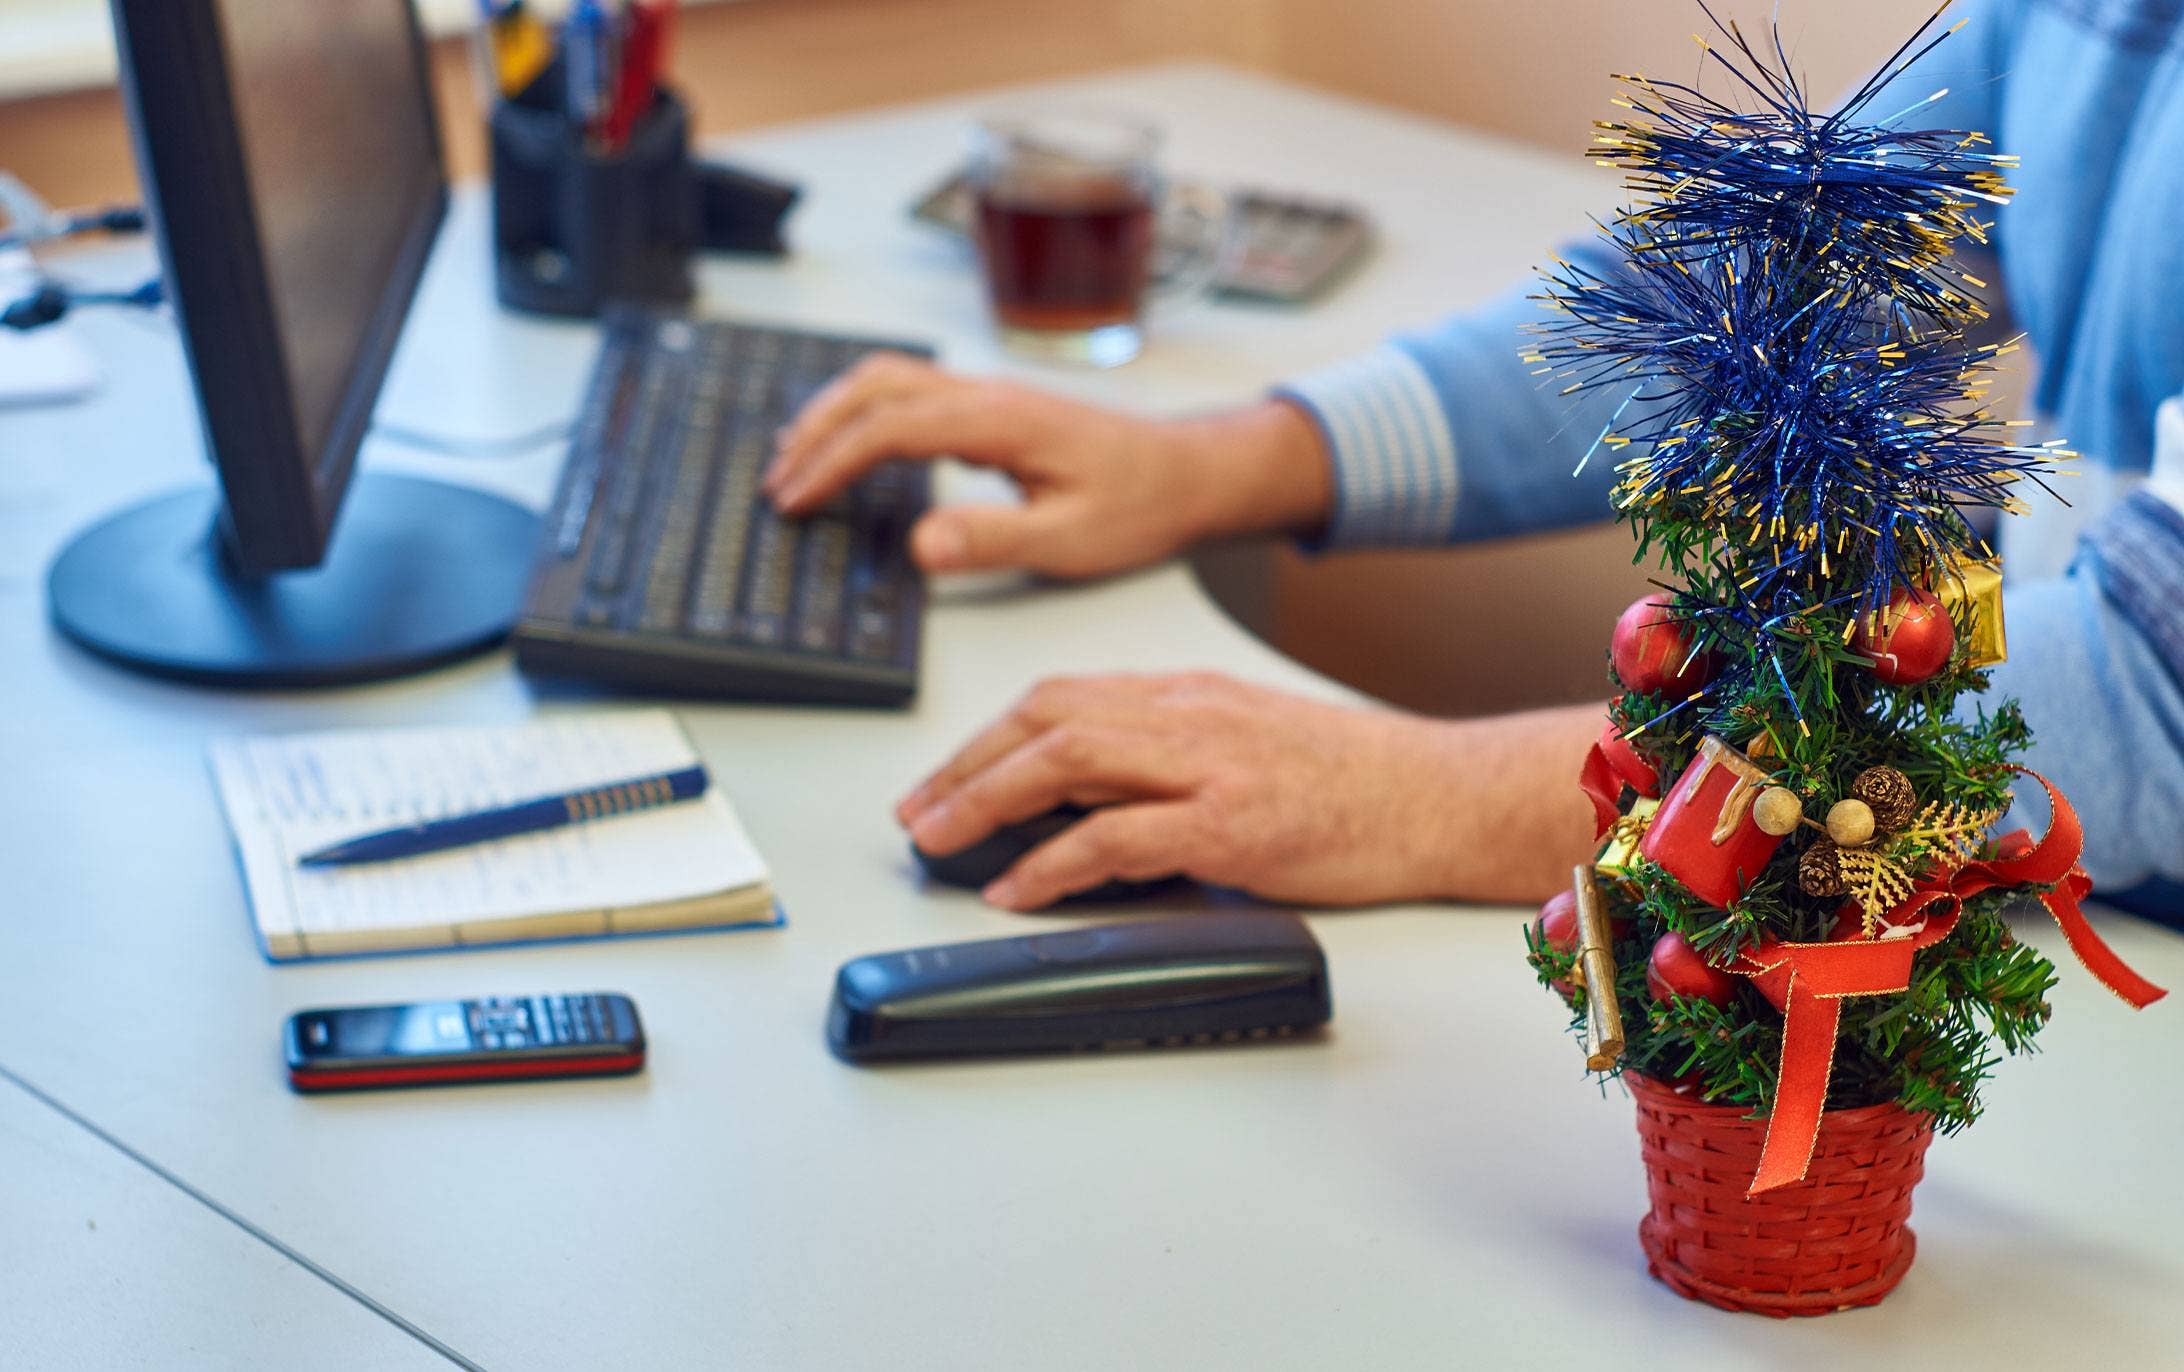 Christmas decorations in the workplace